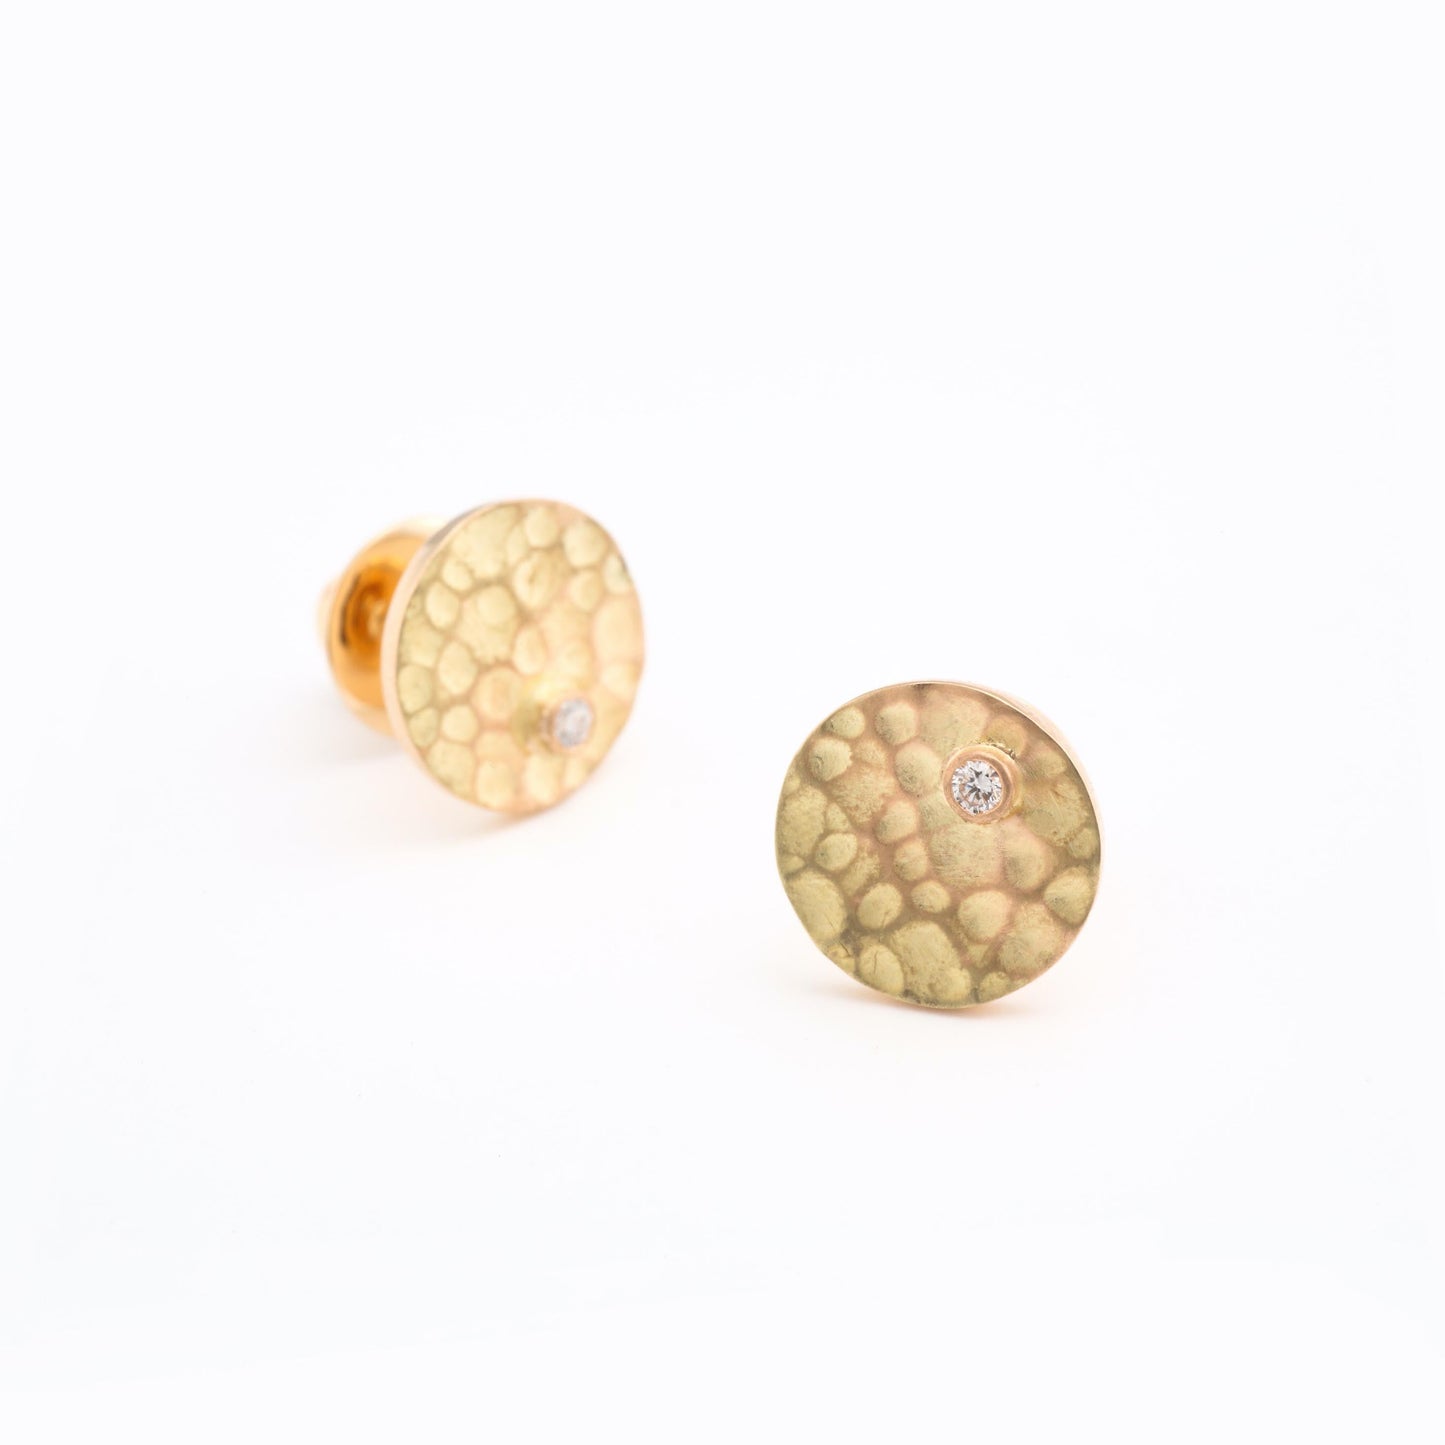 The Parvathi Gold and Diamond Ear Studs by Rasvihar